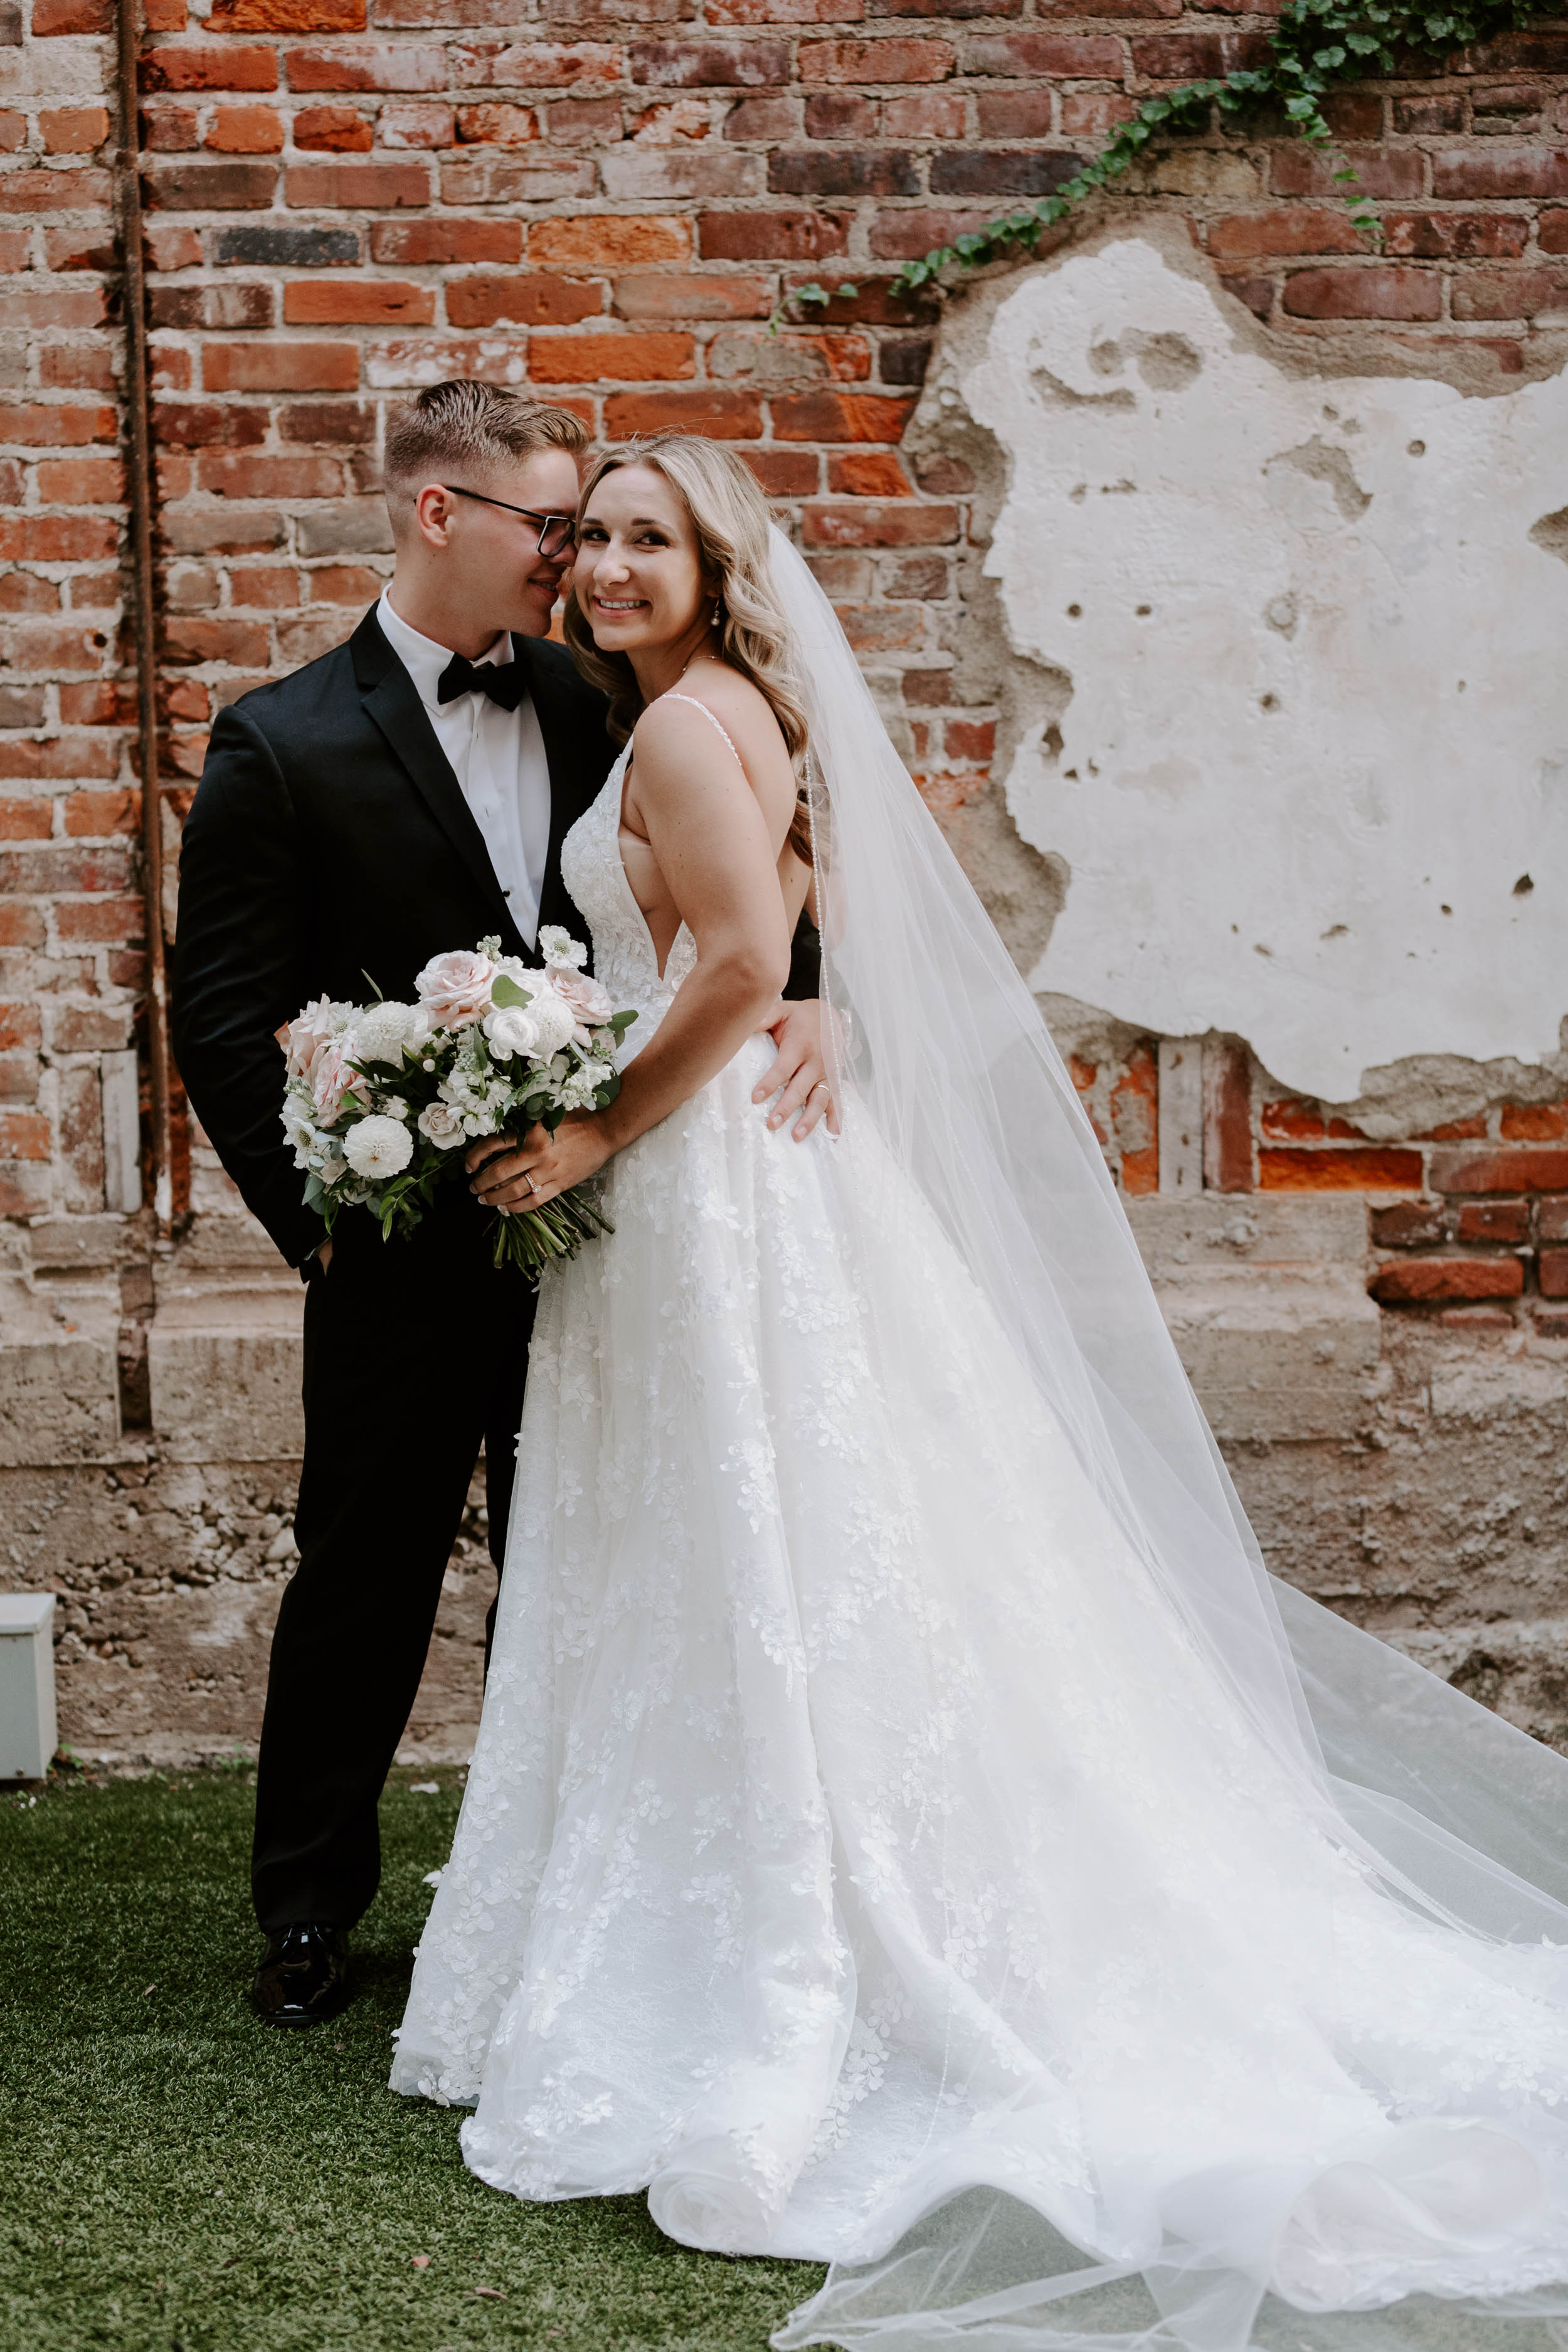 Best locations for outdoor wedding photos with brick wall as backdrop at Hotel Covington